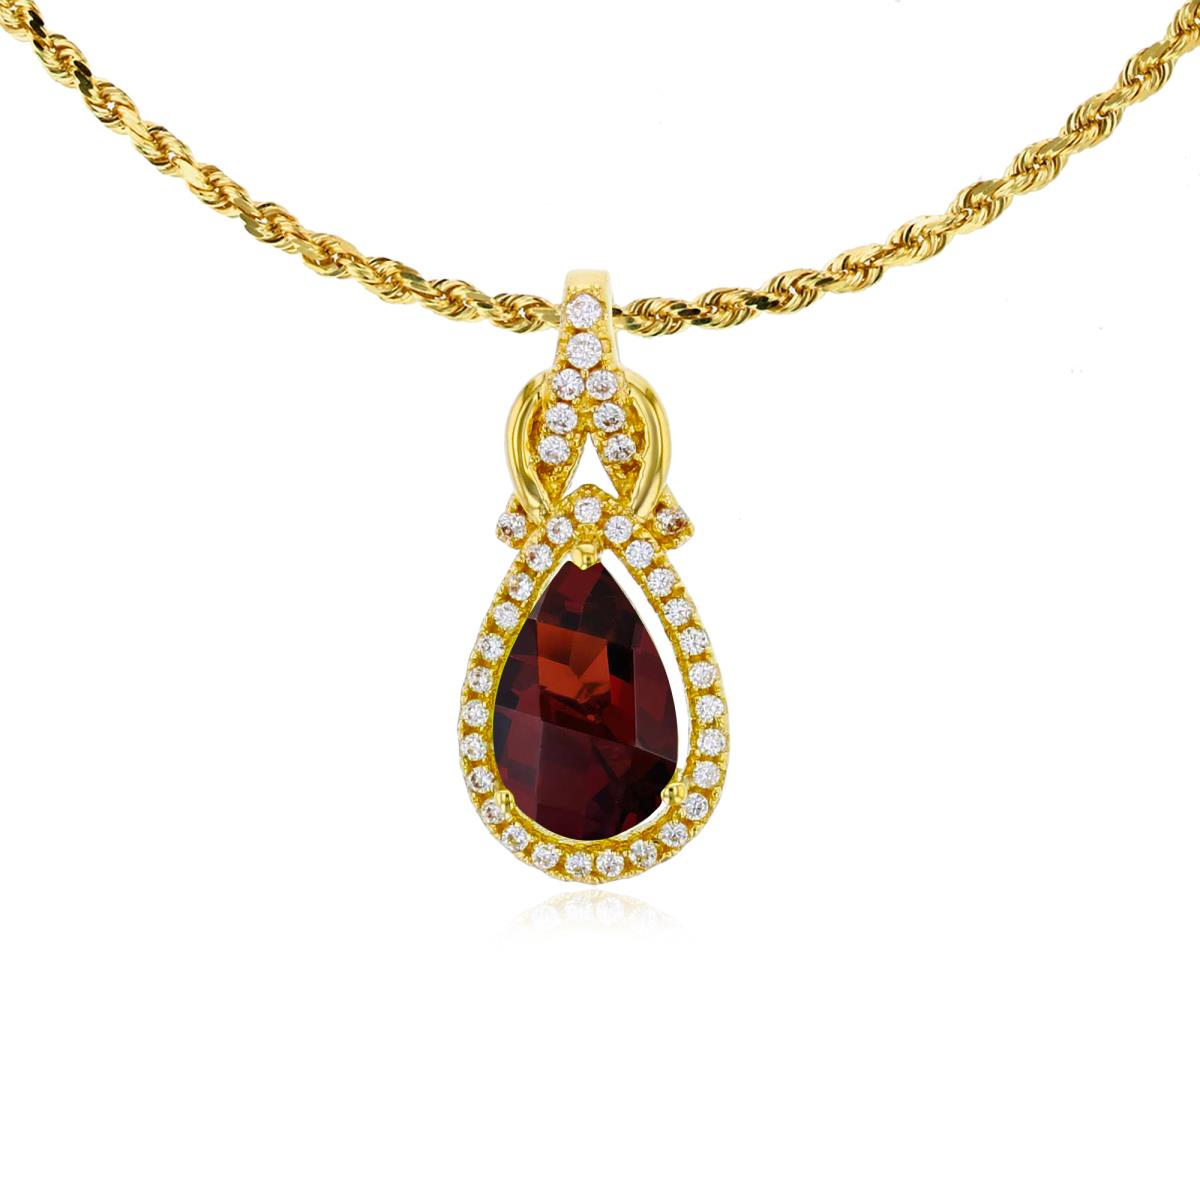 10K Yellow Gold 8x5mm Pear Cut Garnet & 0.11 CTTW Rnd Diamond Knot 18" Rope Chain Necklace